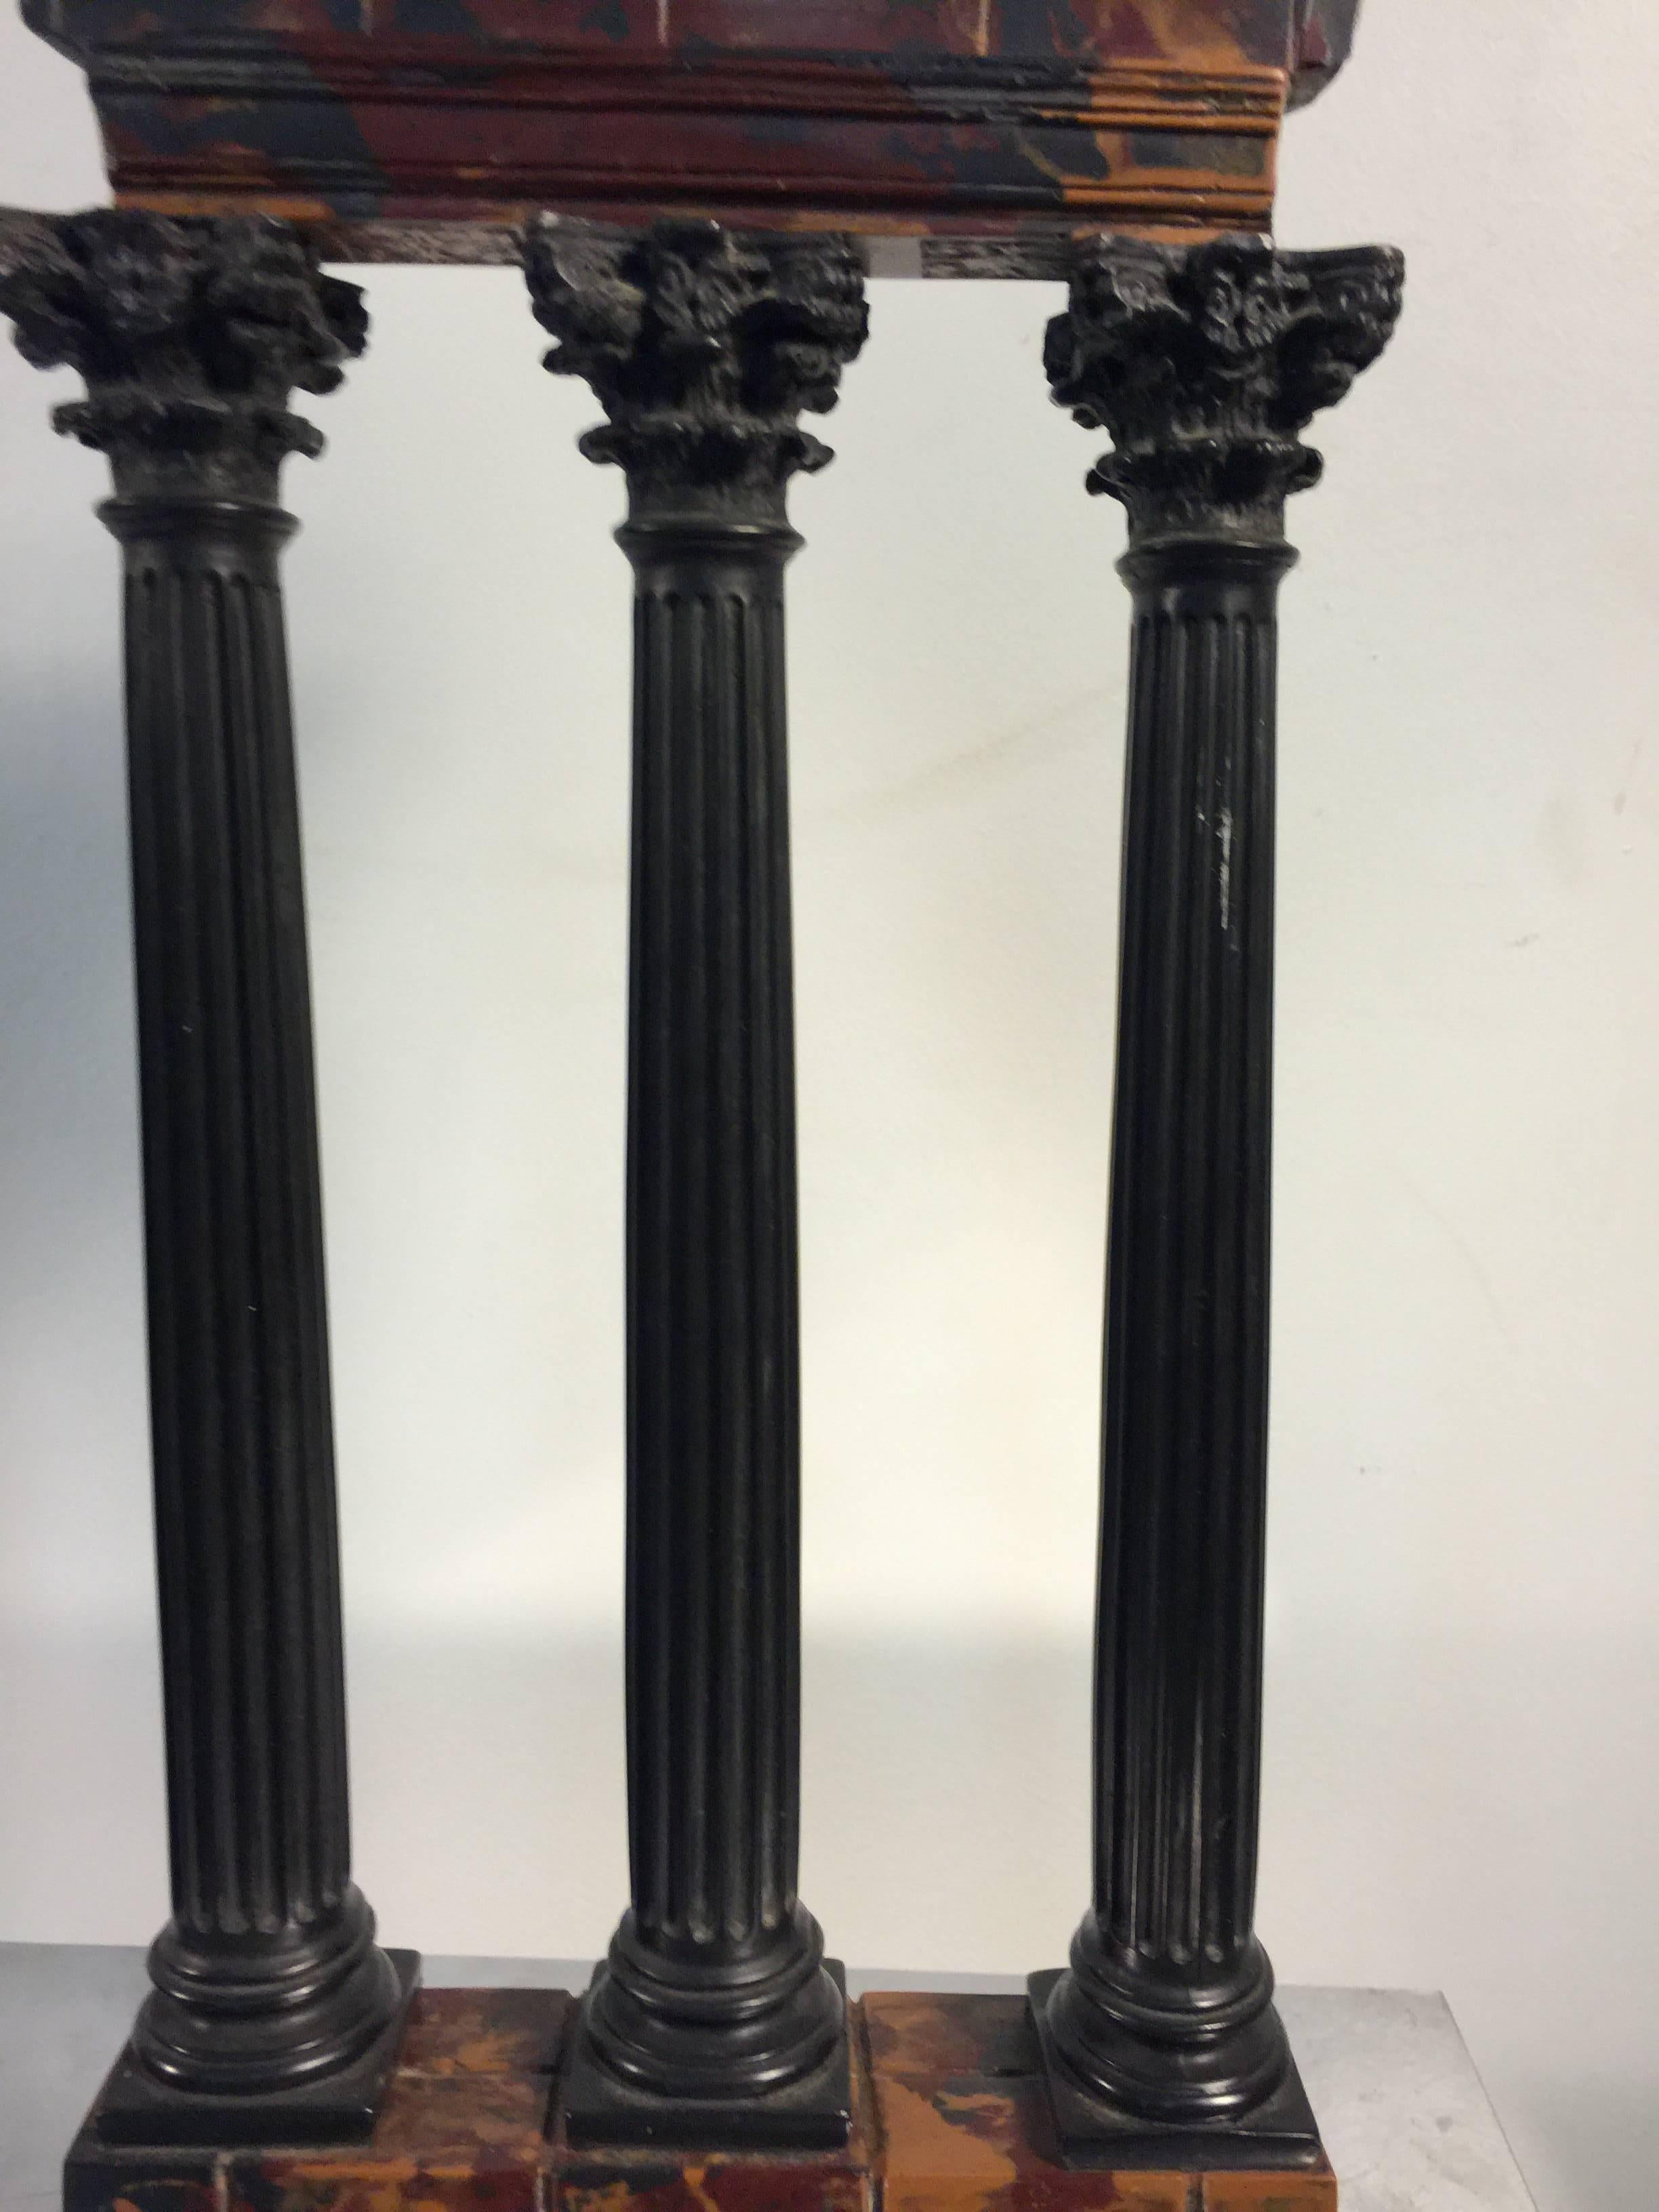 A set of two Roman style Grand Tour models or sculptures of ancient temple ruins; columns with fluted bodies and elaborate Corinthian capitals.

Larger 20 H x 9 W x 2 D.
Smaller 17 H x 8 W x 2 D.

 